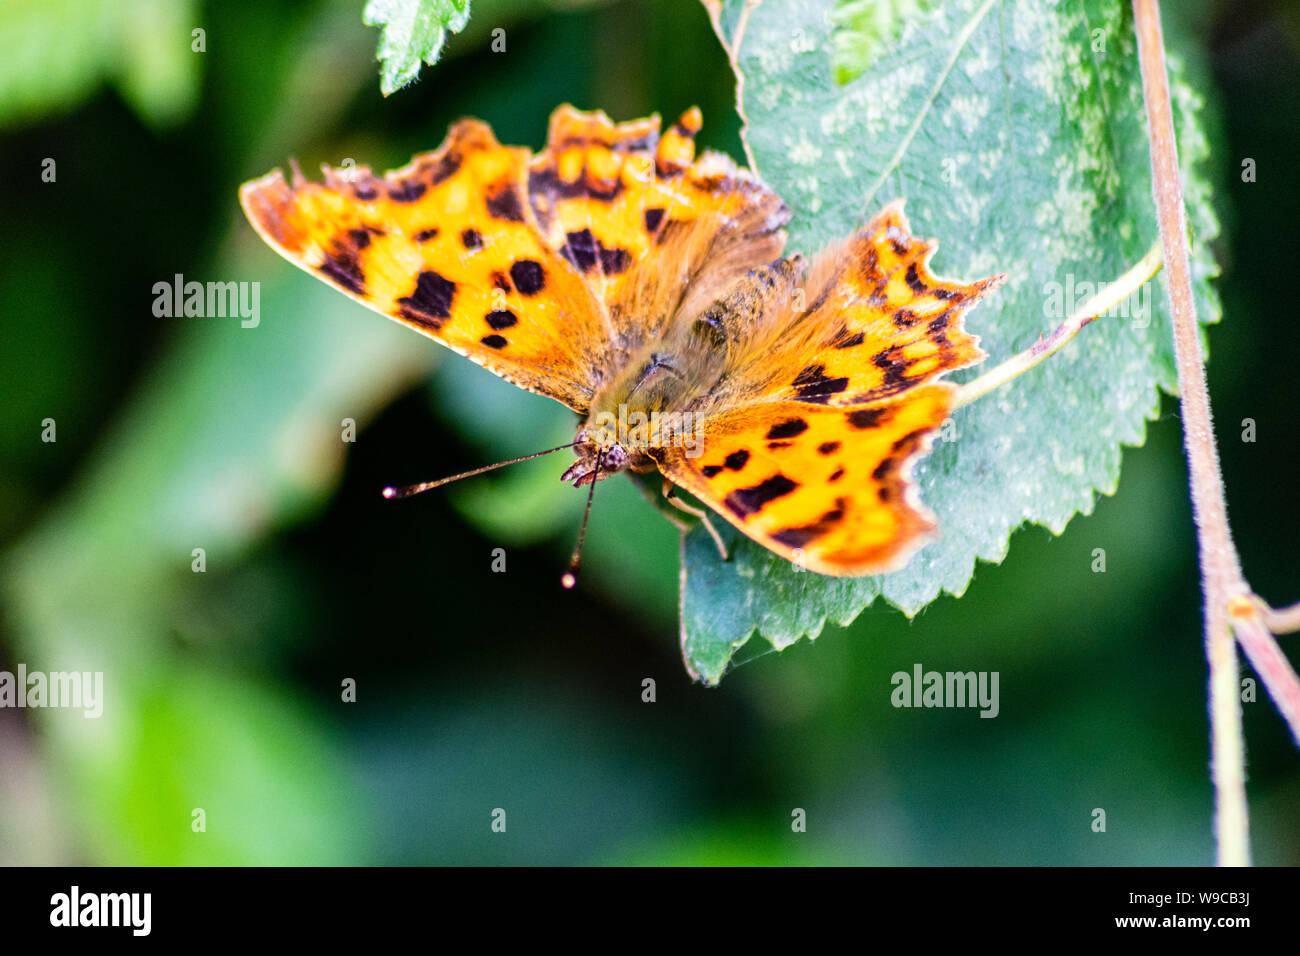 A brown and orange Comma butterfly Polygonia c-album resting on a twig over a leaf with its wings open Stock Photo